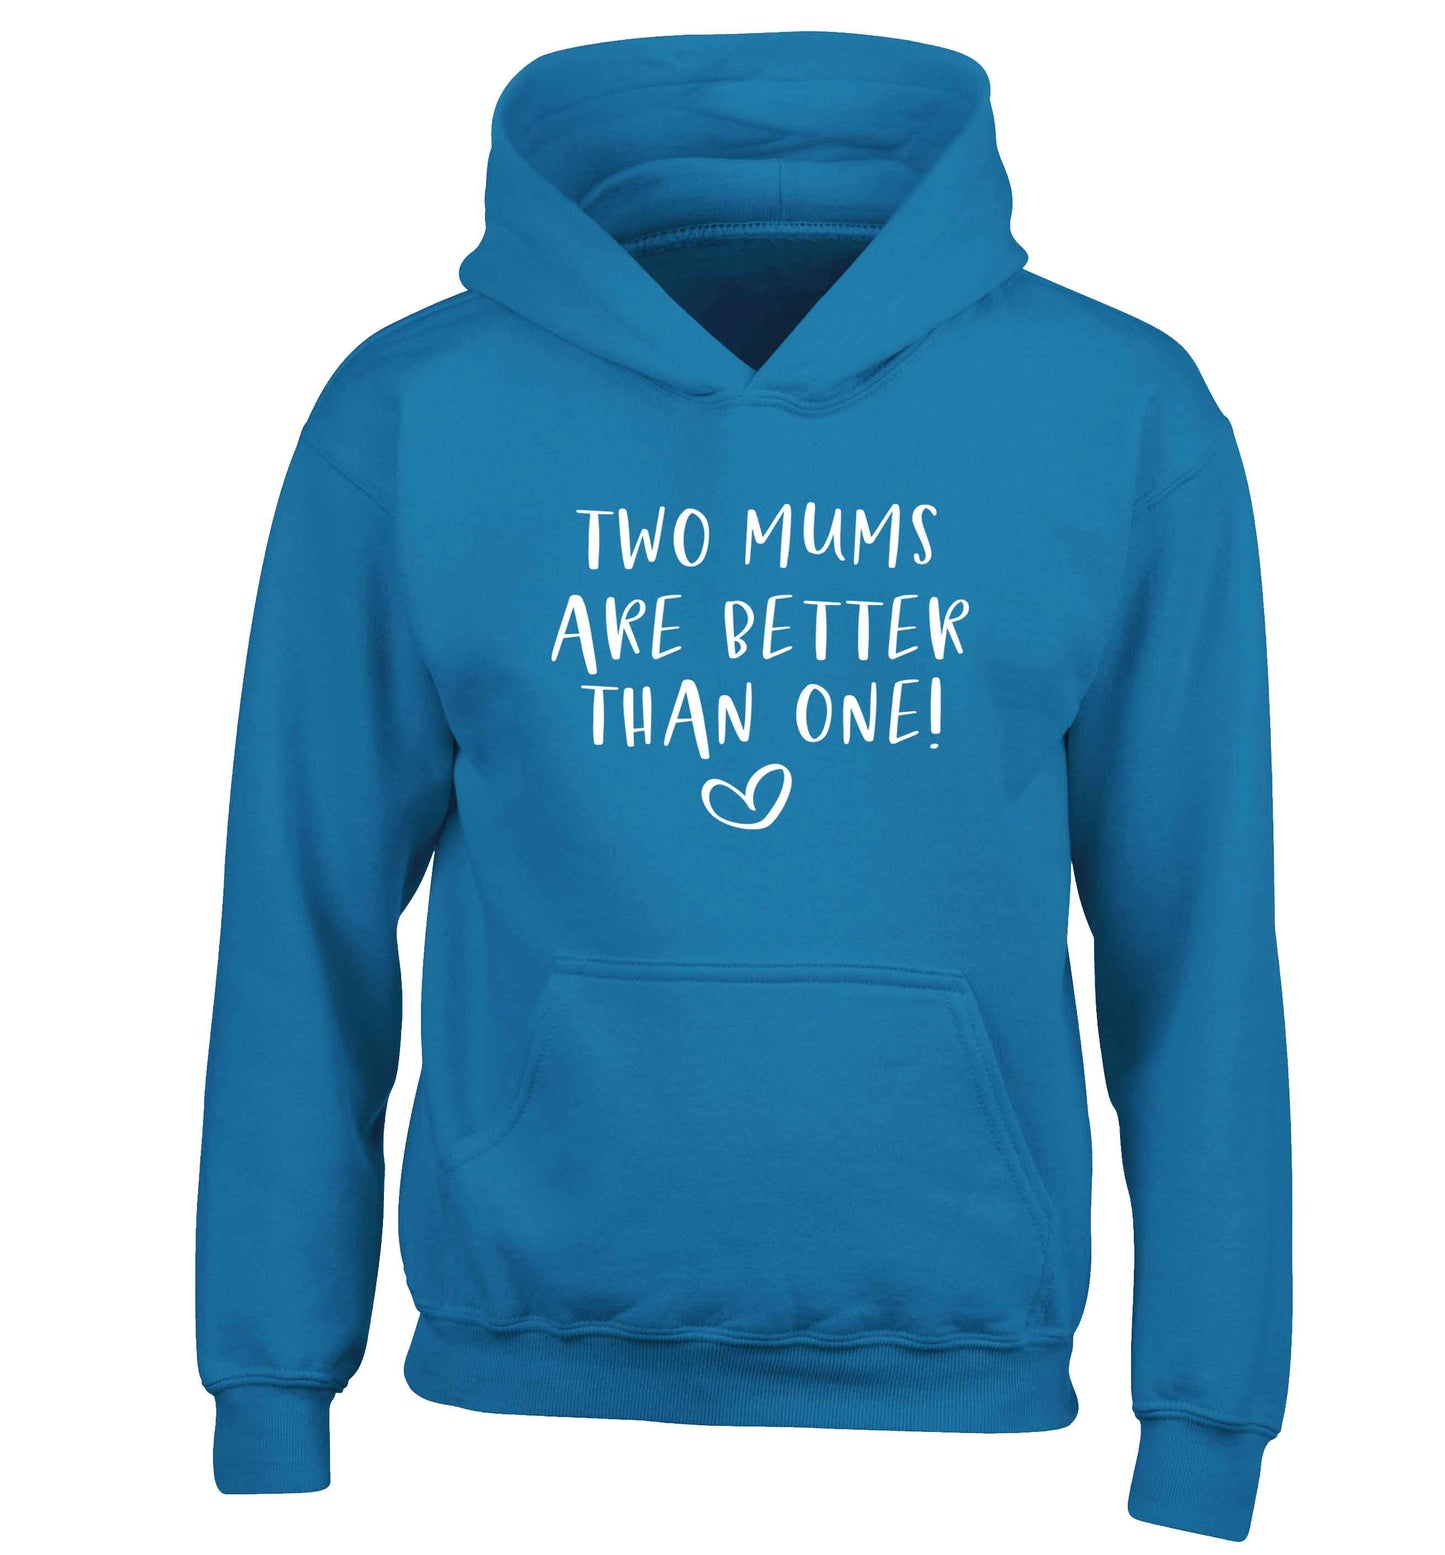 Two mums are better than one children's blue hoodie 12-13 Years